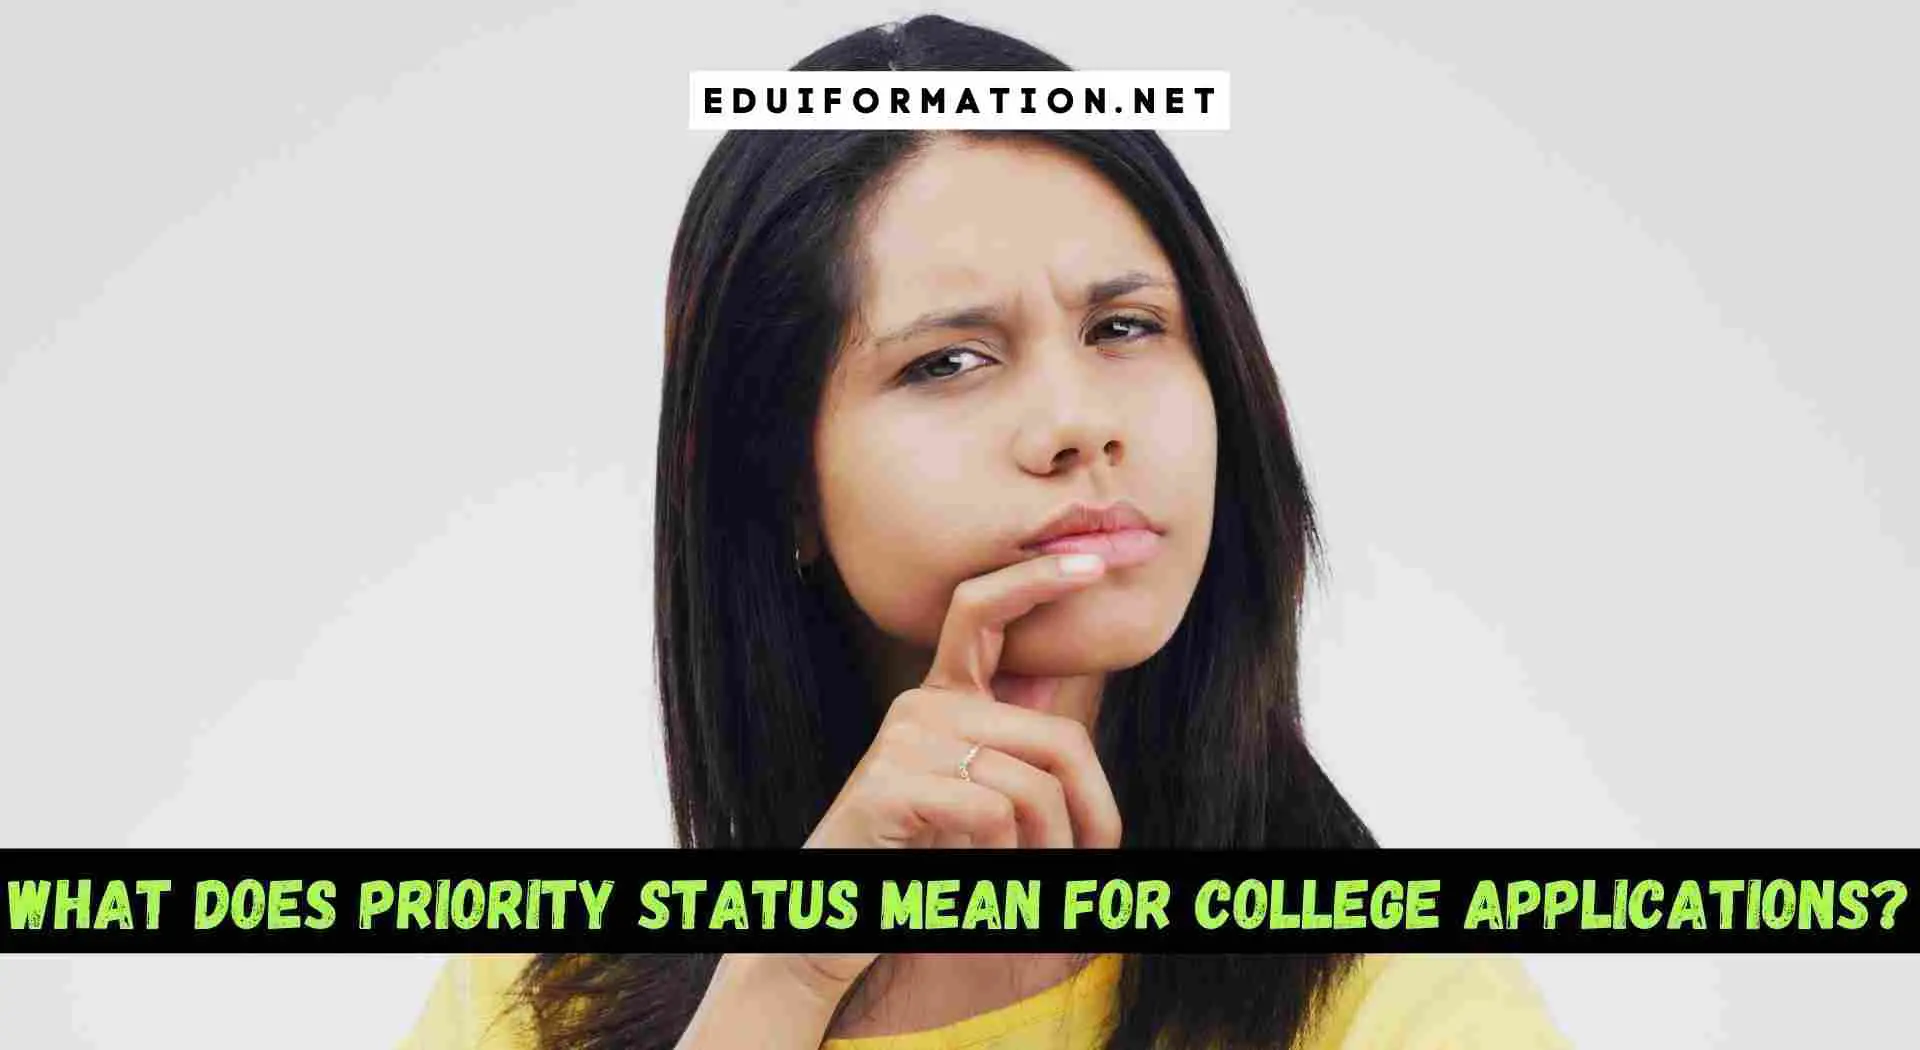 What Does Priority Status Mean for College Applications?